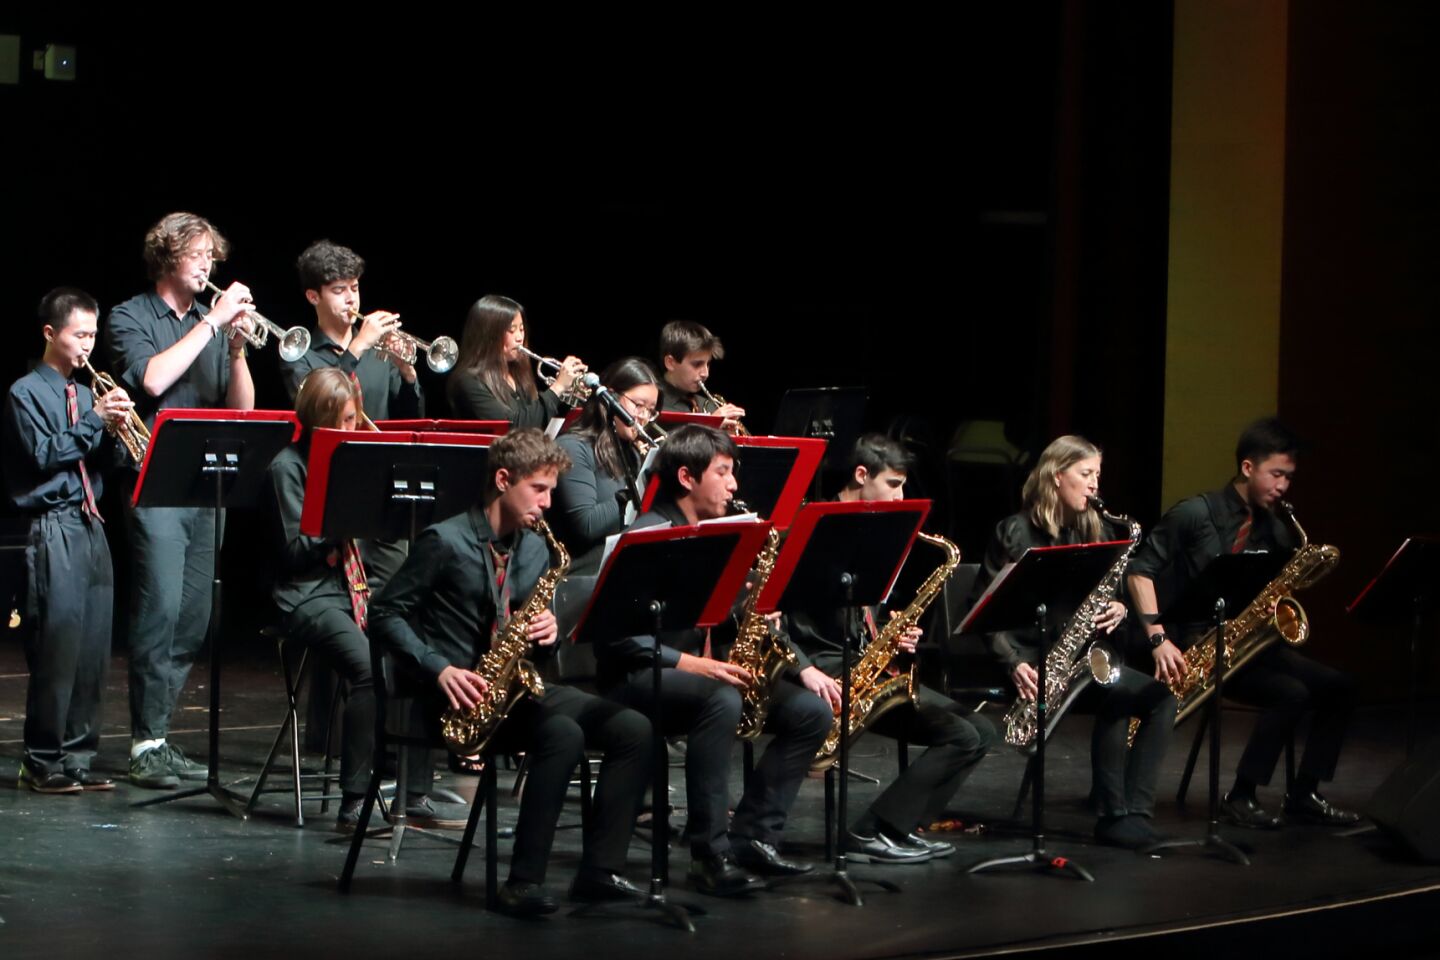 The TPHS Jazz Band performs at the Visual and Performing Arts Festival 2022